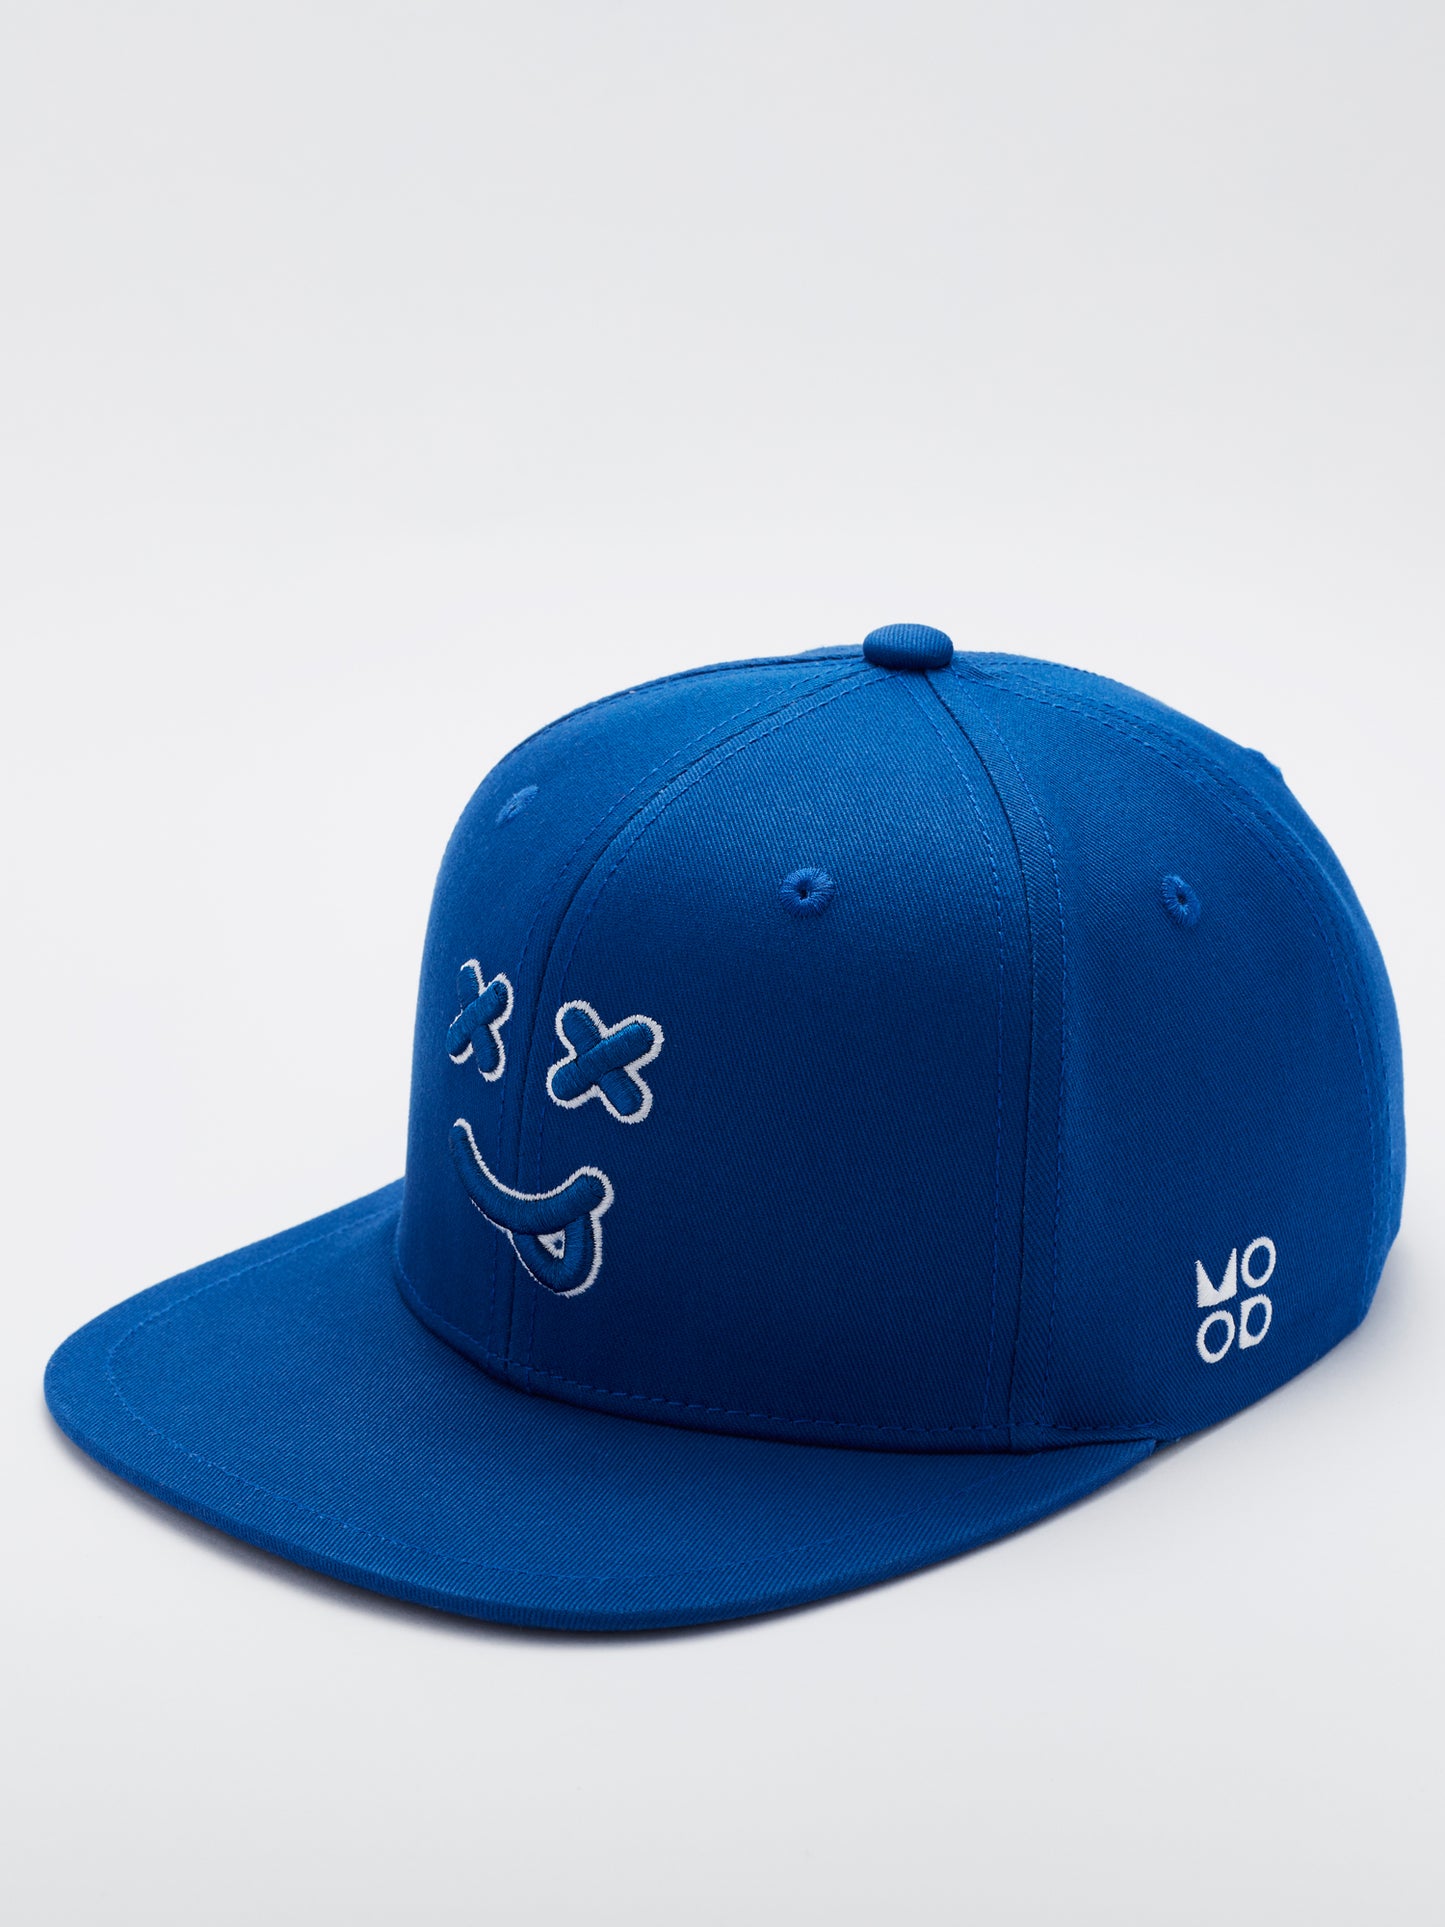 MOOD Caps - XX smiley face baseball cap flat brim in blue color side view